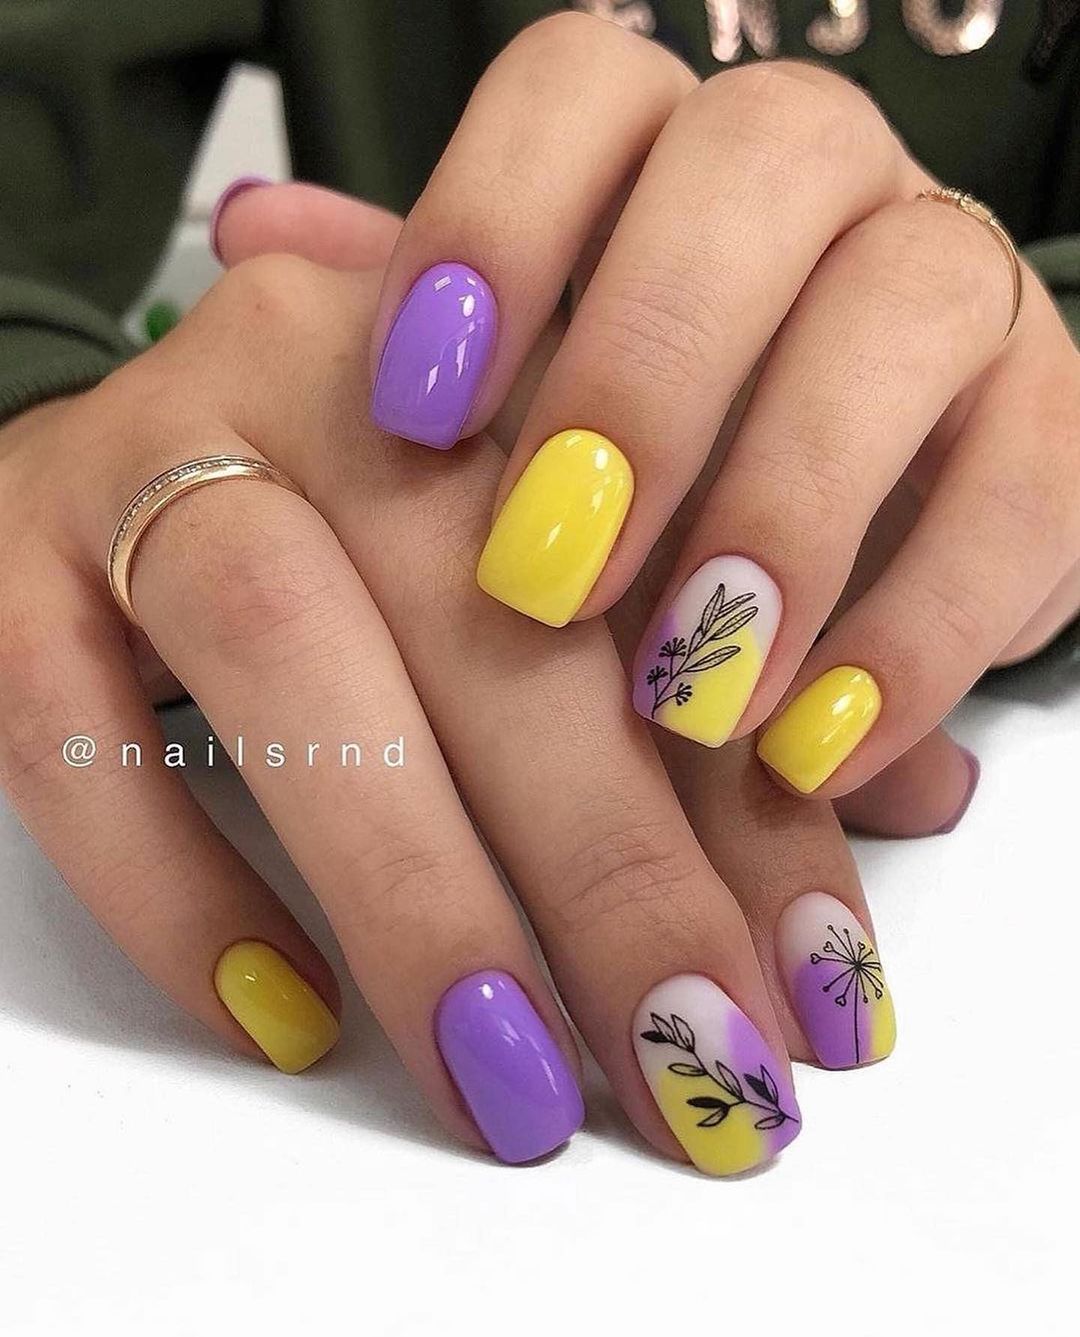 25 Trending Summer Nail Colors And Designs For 2021 images 4